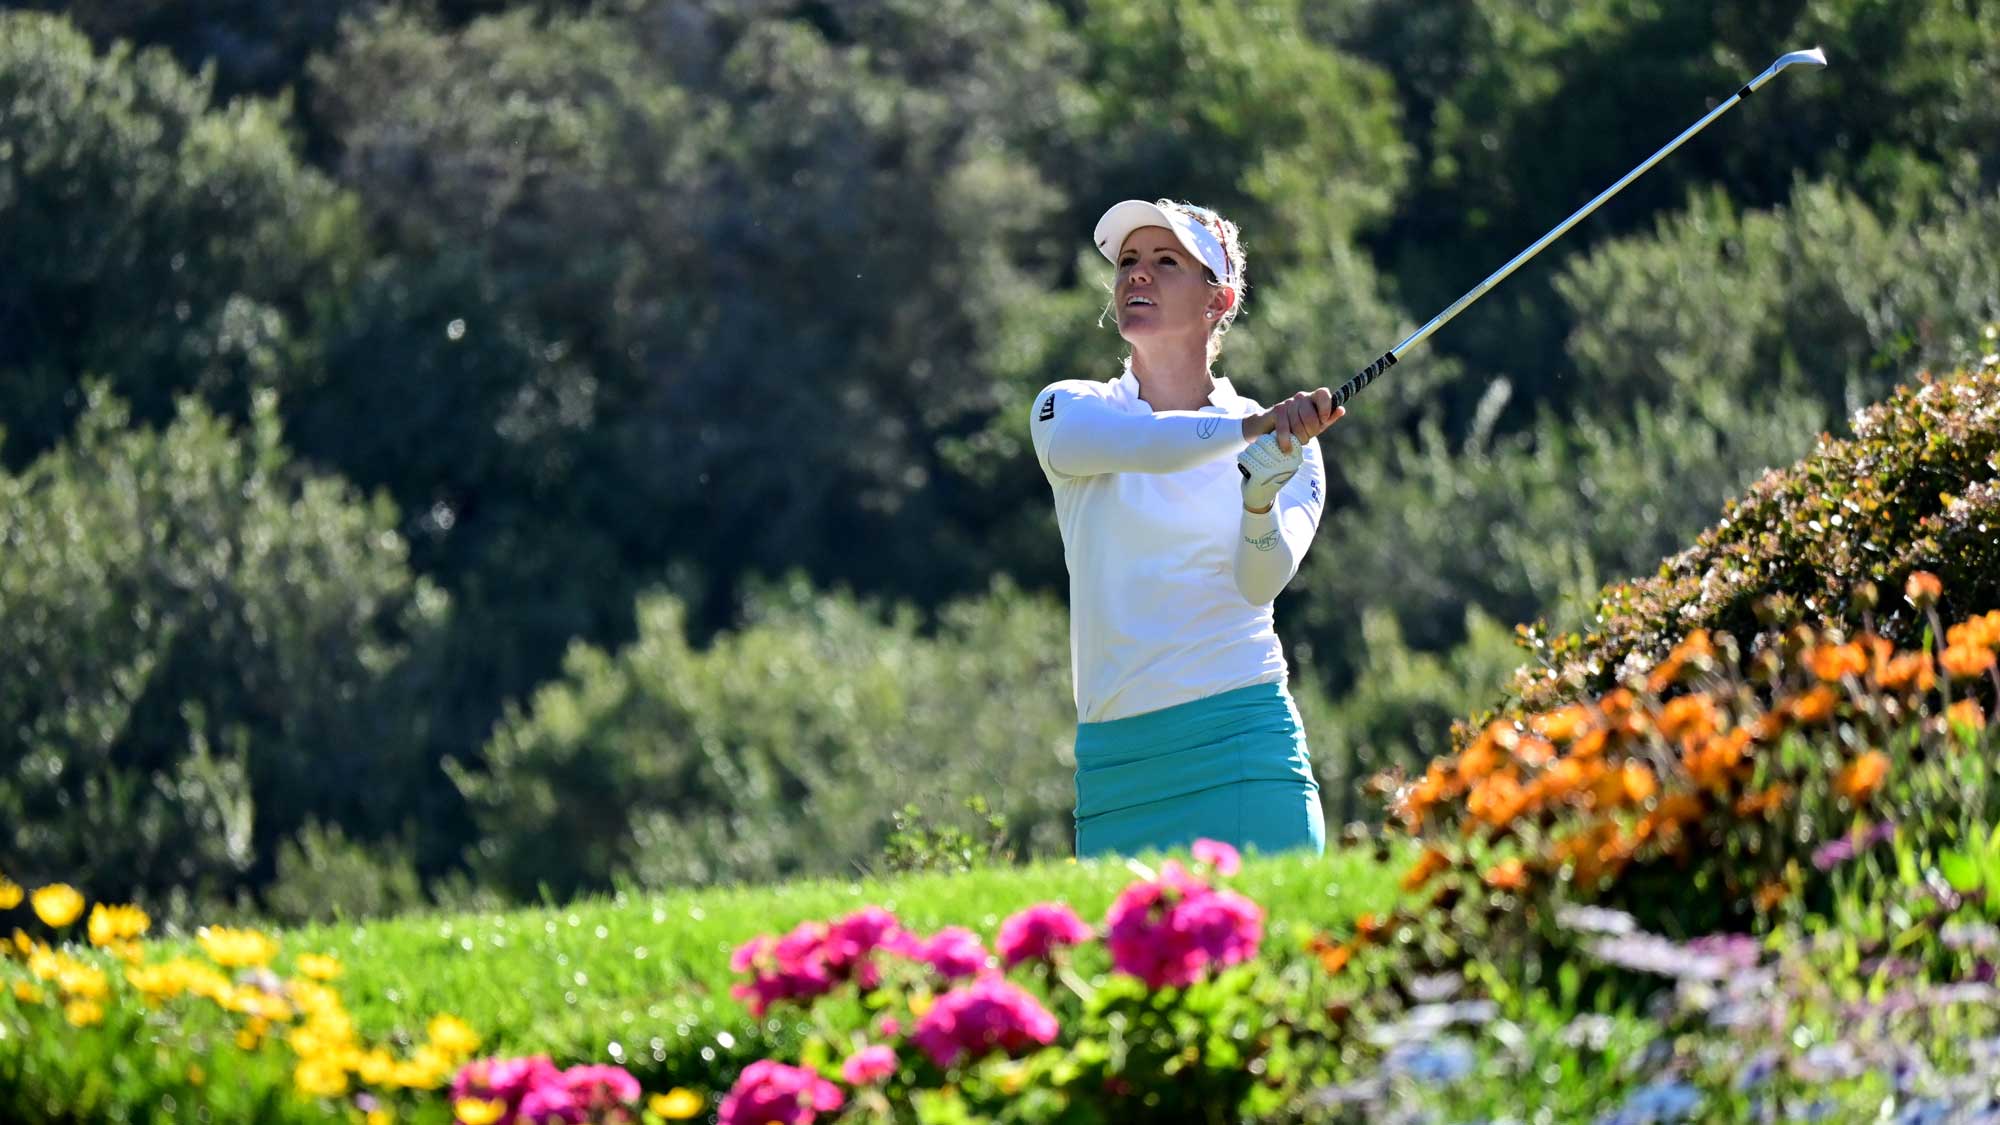 Amy Olson tees off the 14th hole during the Final Round of the KIA Classic at the Aviara Golf Club on March 28, 2021 in Carlsbad, California.